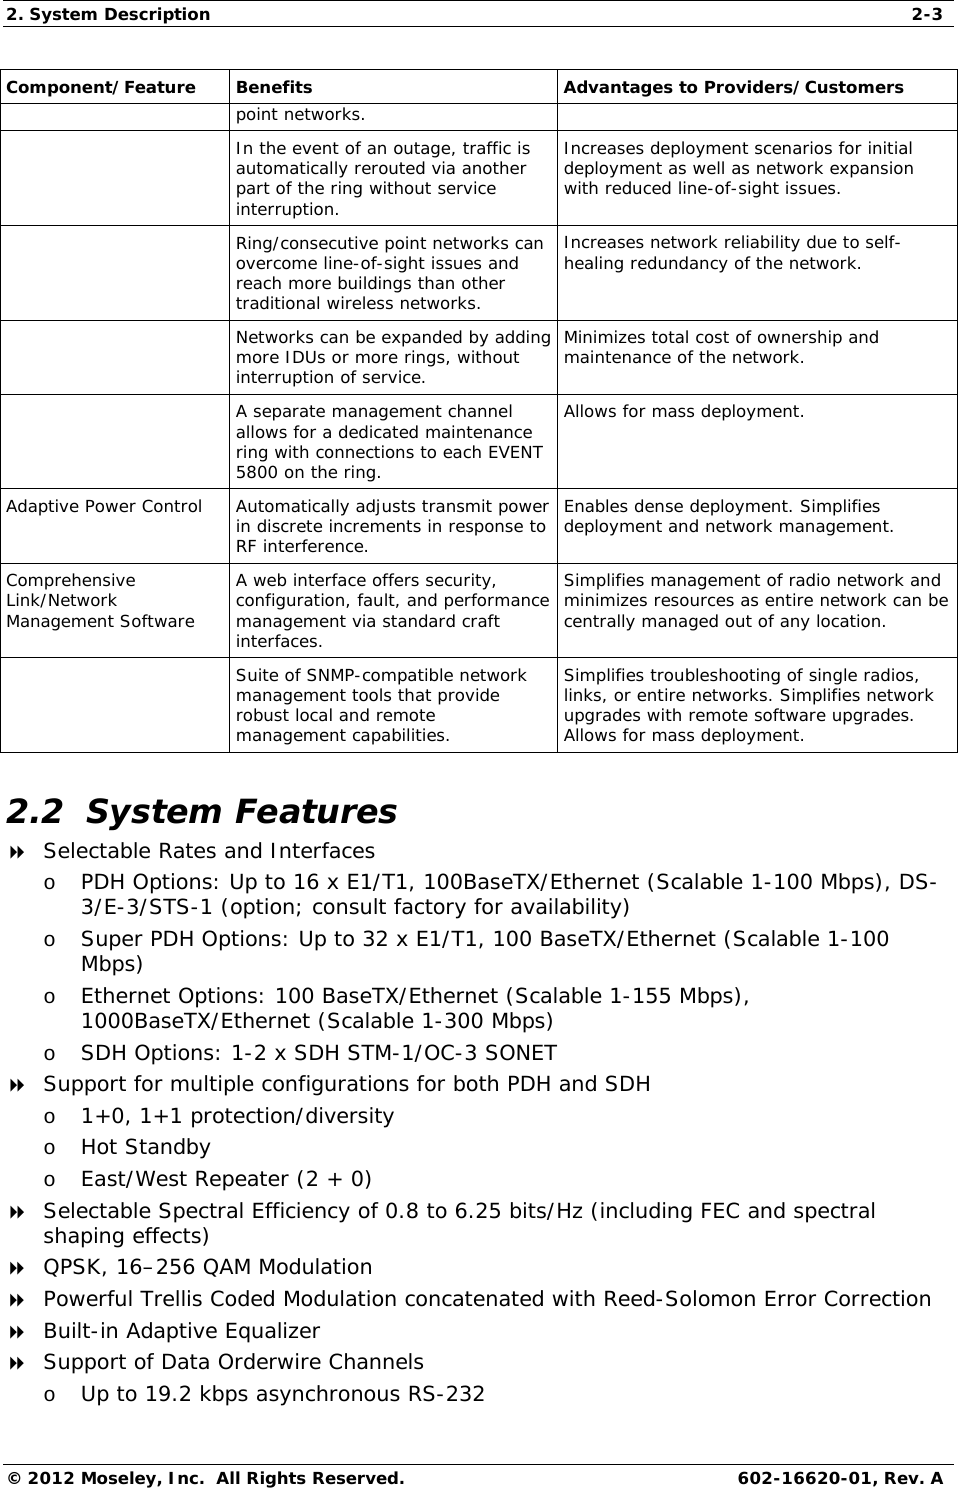 2. System Description  2-3 © 2012 Moseley, Inc.  All Rights Reserved.  602-16620-01, Rev. A Component/Feature Benefits  Advantages to Providers/Customers point networks.   In the event of an outage, traffic is automatically rerouted via another part of the ring without service interruption. Increases deployment scenarios for initial deployment as well as network expansion with reduced line-of-sight issues.   Ring/consecutive point networks can overcome line-of-sight issues and reach more buildings than other traditional wireless networks. Increases network reliability due to self-healing redundancy of the network.   Networks can be expanded by adding more IDUs or more rings, without interruption of service. Minimizes total cost of ownership and maintenance of the network.   A separate management channel allows for a dedicated maintenance ring with connections to each EVENT 5800 on the ring. Allows for mass deployment. Adaptive Power Control  Automatically adjusts transmit power in discrete increments in response to RF interference. Enables dense deployment. Simplifies deployment and network management. Comprehensive Link/Network Management Software A web interface offers security, configuration, fault, and performance management via standard craft interfaces. Simplifies management of radio network and minimizes resources as entire network can be centrally managed out of any location.   Suite of SNMP-compatible network management tools that provide robust local and remote management capabilities. Simplifies troubleshooting of single radios, links, or entire networks. Simplifies network upgrades with remote software upgrades. Allows for mass deployment. 2.2  System Features  Selectable Rates and Interfaces o PDH Options: Up to 16 x E1/T1, 100BaseTX/Ethernet (Scalable 1-100 Mbps), DS-3/E-3/STS-1 (option; consult factory for availability) o Super PDH Options: Up to 32 x E1/T1, 100 BaseTX/Ethernet (Scalable 1-100 Mbps) o Ethernet Options: 100 BaseTX/Ethernet (Scalable 1-155 Mbps), 1000BaseTX/Ethernet (Scalable 1-300 Mbps)  o SDH Options: 1-2 x SDH STM-1/OC-3 SONET  Support for multiple configurations for both PDH and SDH o 1+0, 1+1 protection/diversity o Hot Standby o East/West Repeater (2 + 0)  Selectable Spectral Efficiency of 0.8 to 6.25 bits/Hz (including FEC and spectral shaping effects)  QPSK, 16–256 QAM Modulation  Powerful Trellis Coded Modulation concatenated with Reed-Solomon Error Correction   Built-in Adaptive Equalizer  Support of Data Orderwire Channels o Up to 19.2 kbps asynchronous RS-232  